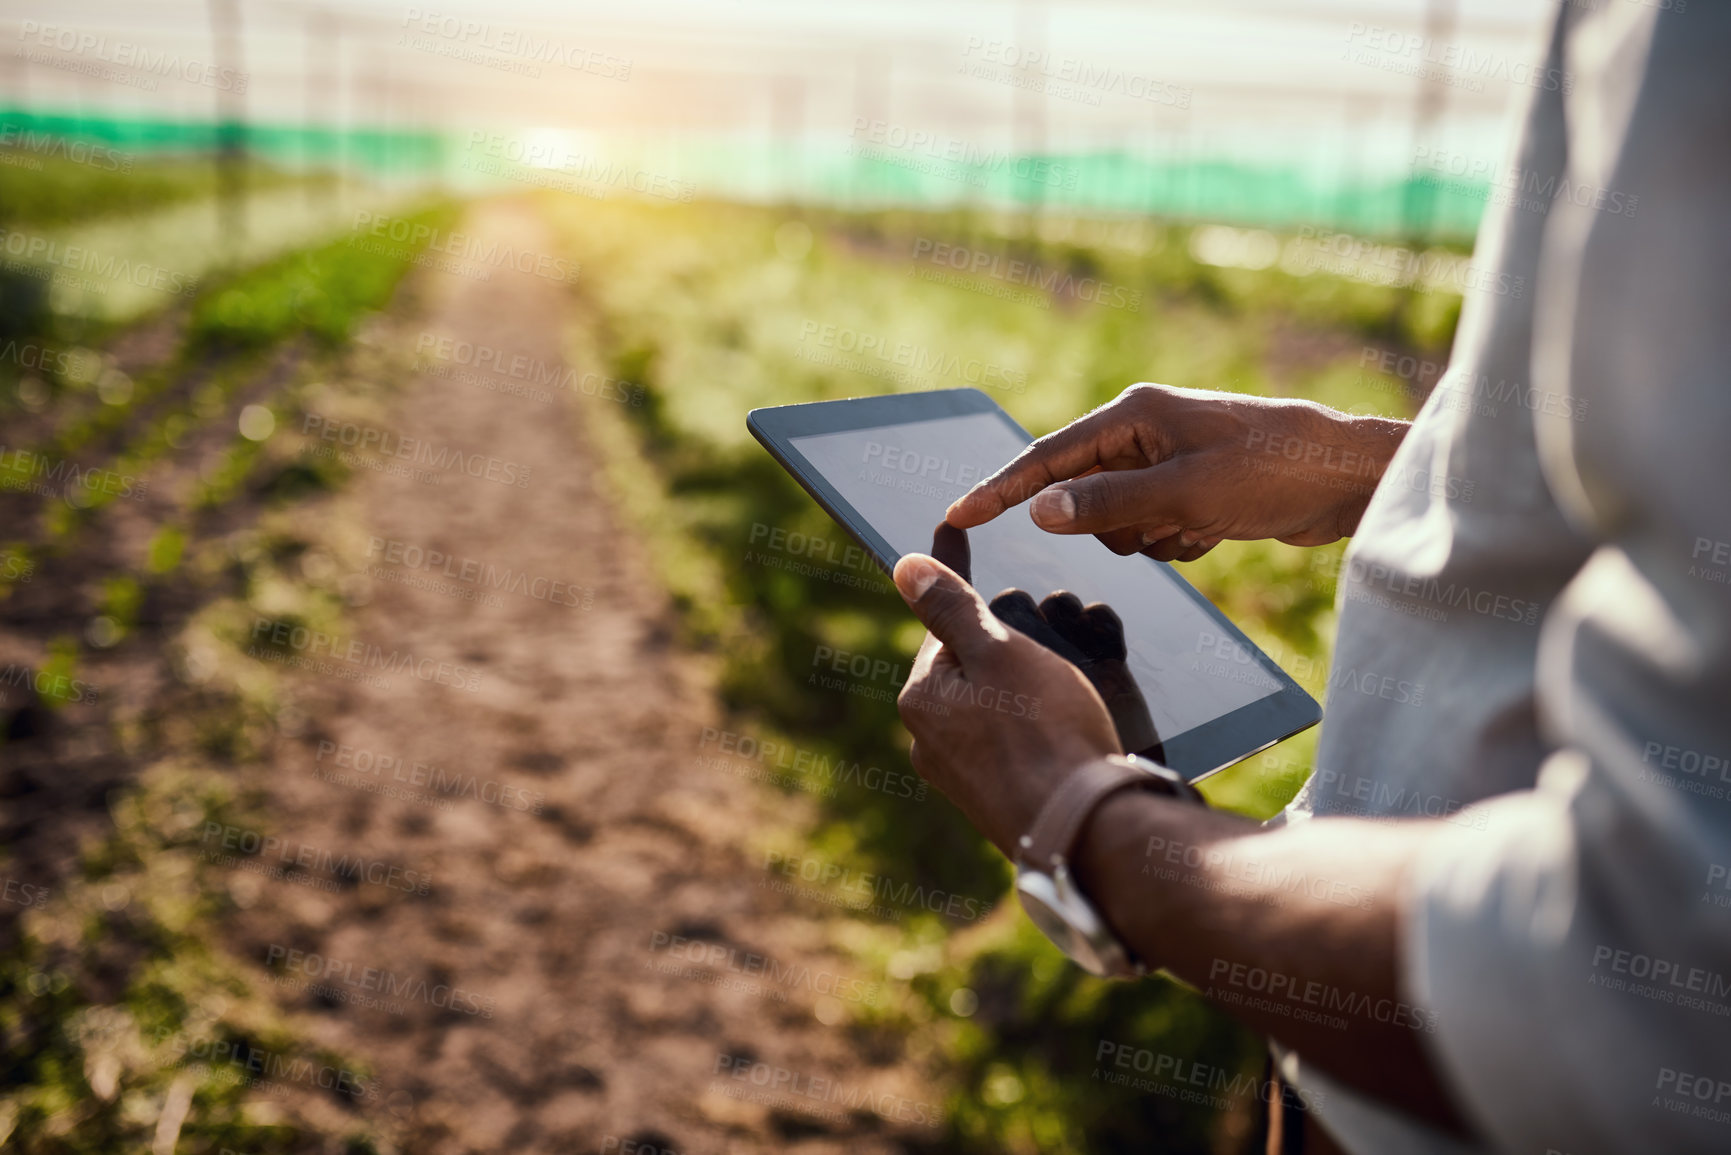 Buy stock photo Cropped shot of an unrecognizable male farmer using a tablet while working on his farm